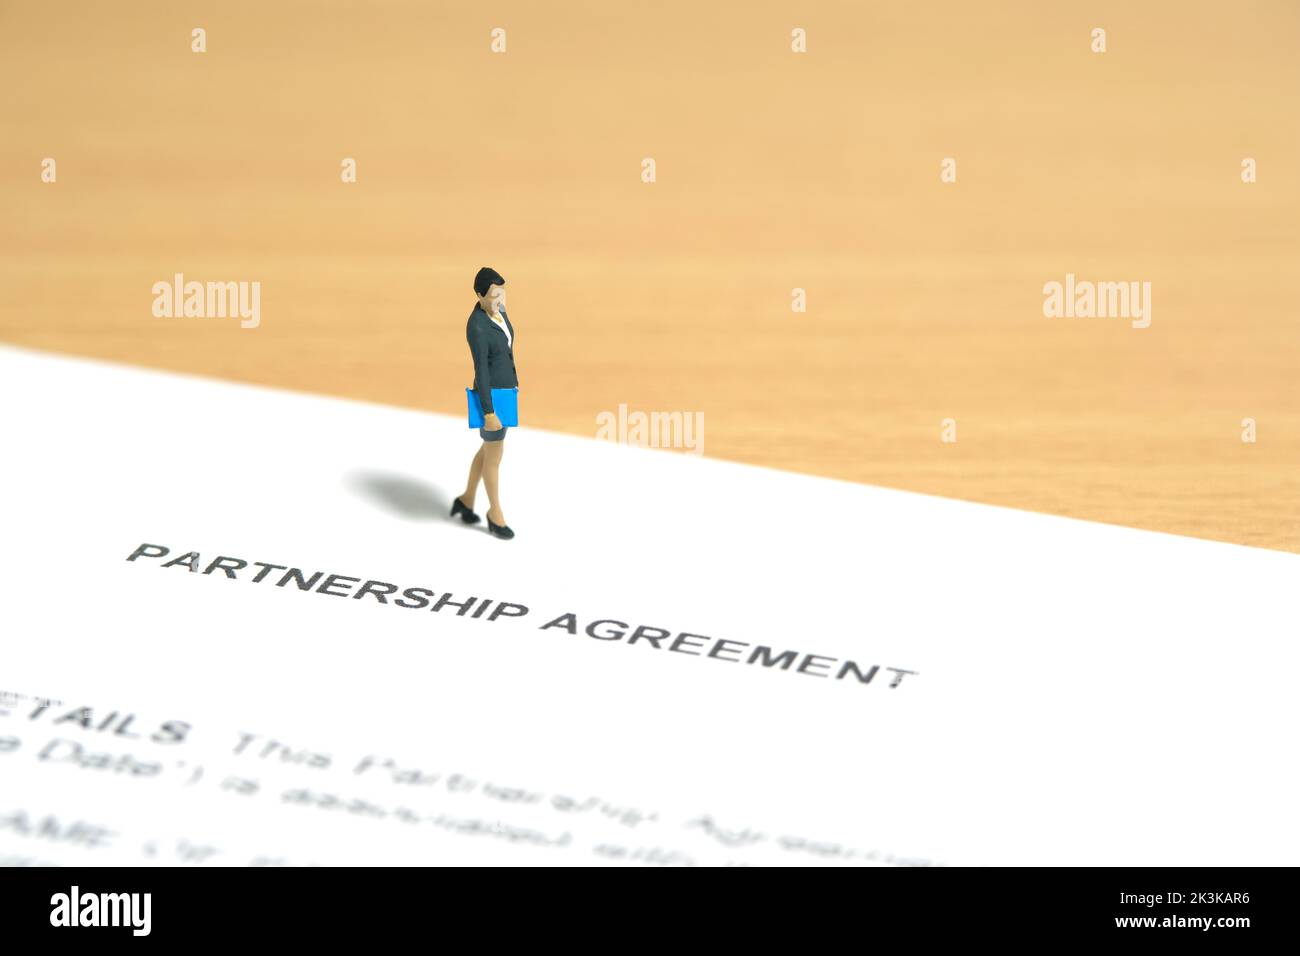 Miniature people toy figure photography. Business partner contract sign concept. A businesswoman walking above partnership agreement file document. Im Stock Photo